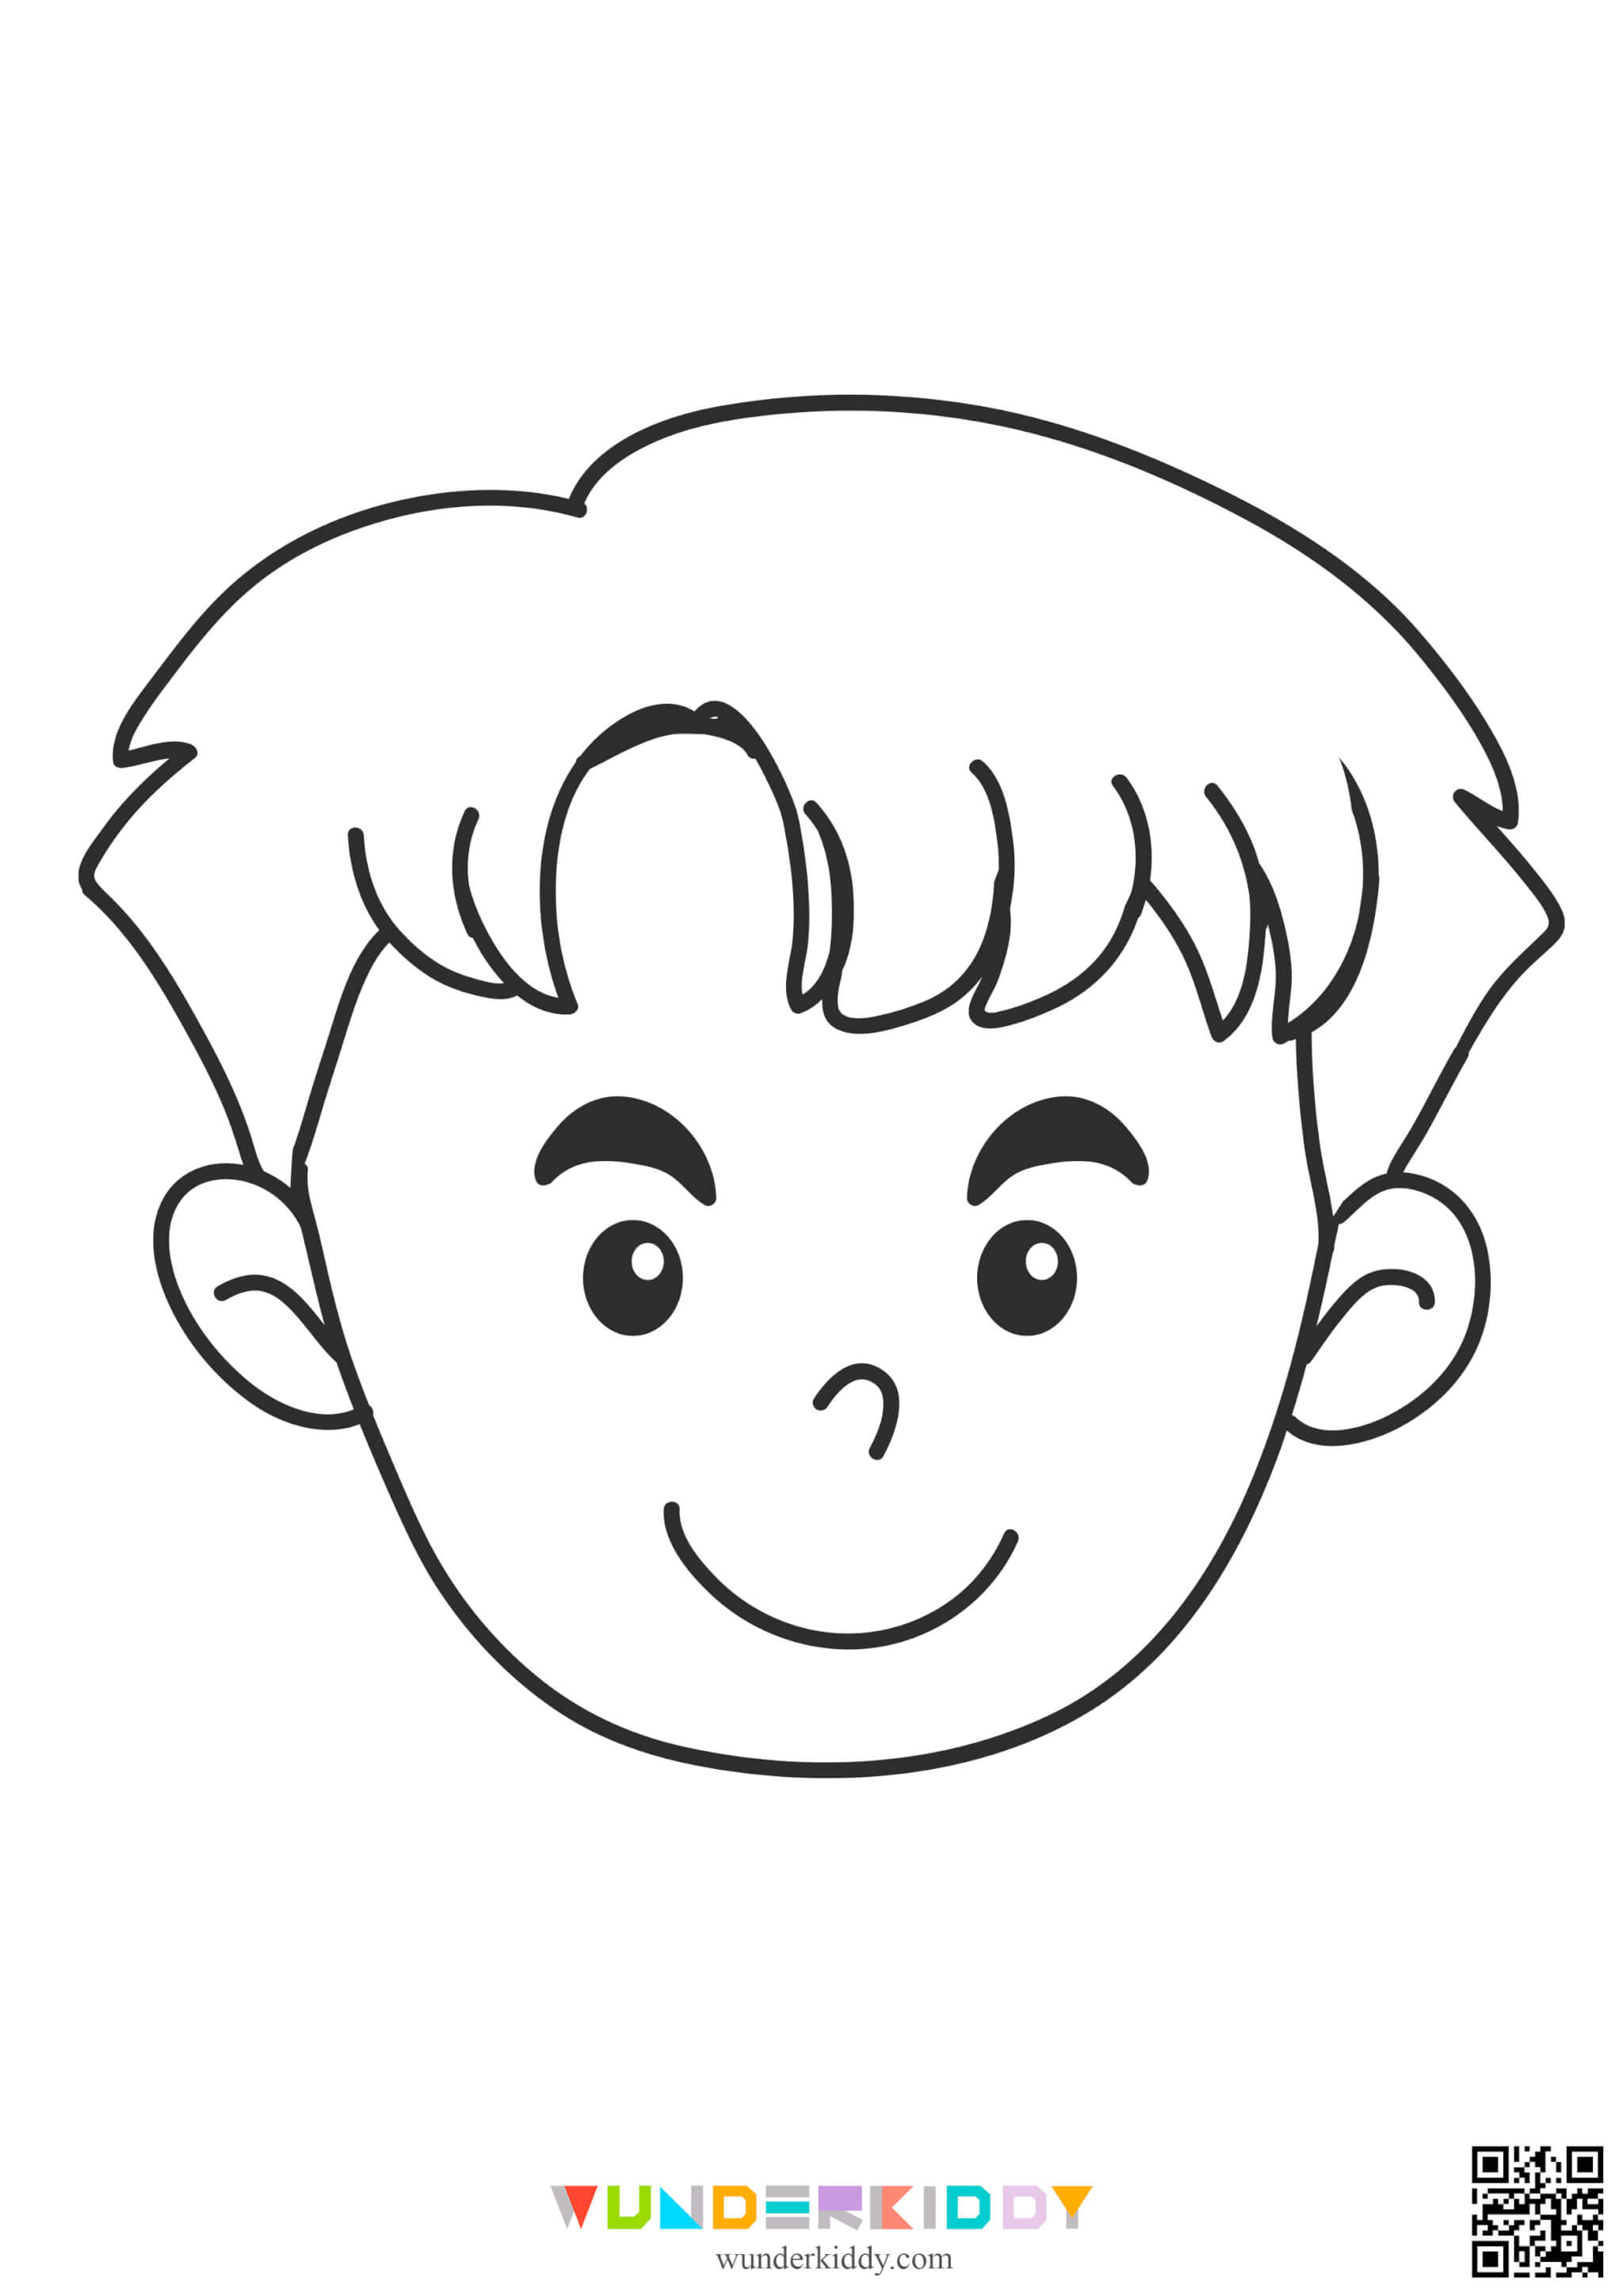 Face Coloring Page - Image 6